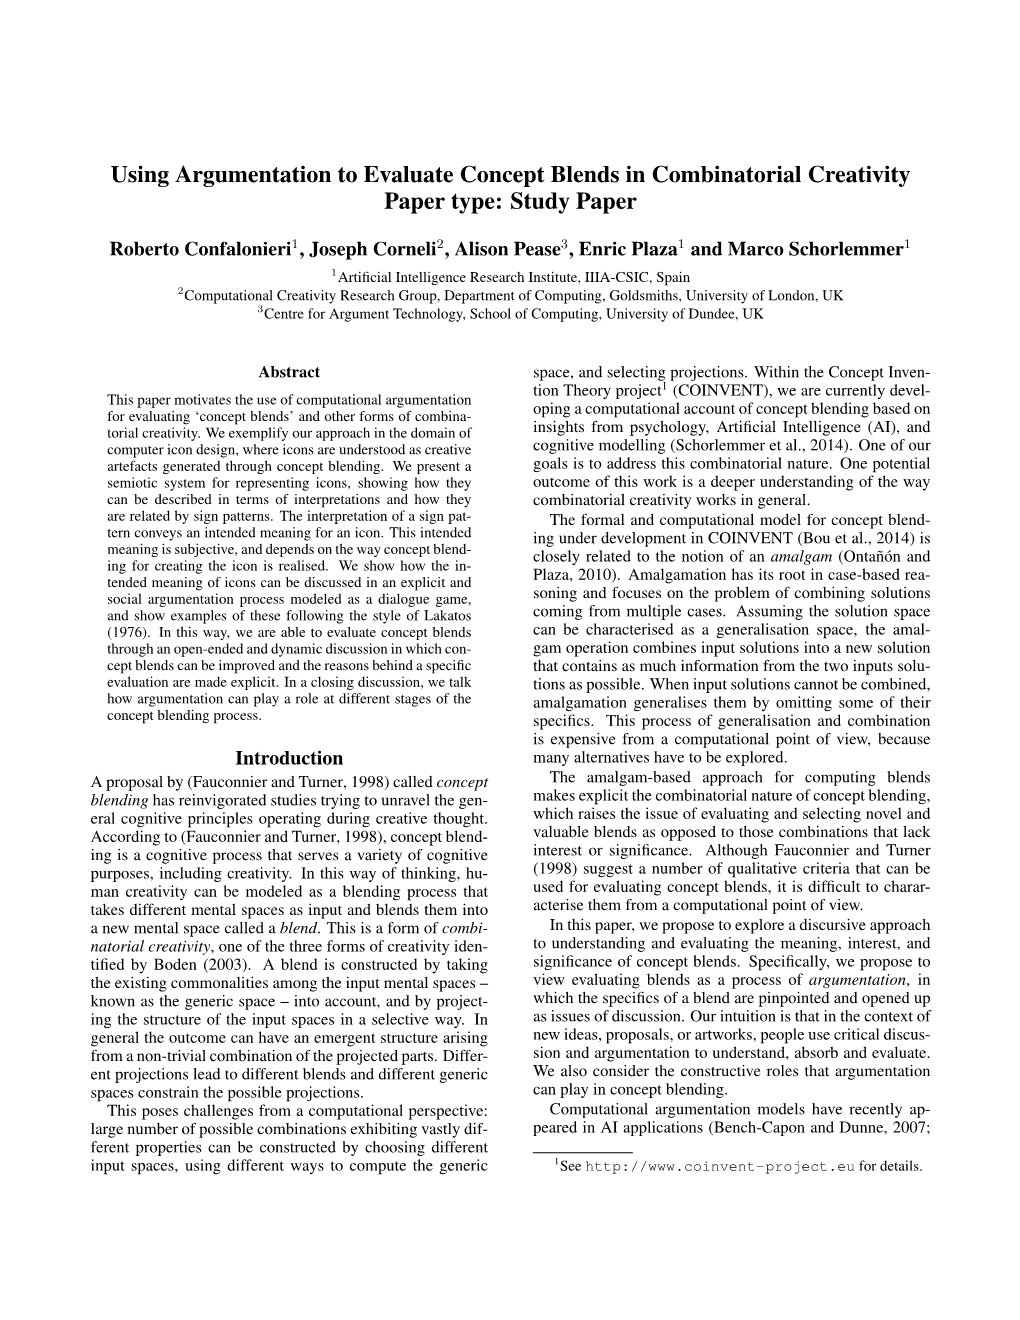 Using Argumentation to Evaluate Concept Blends in Combinatorial Creativity Paper Type: Study Paper